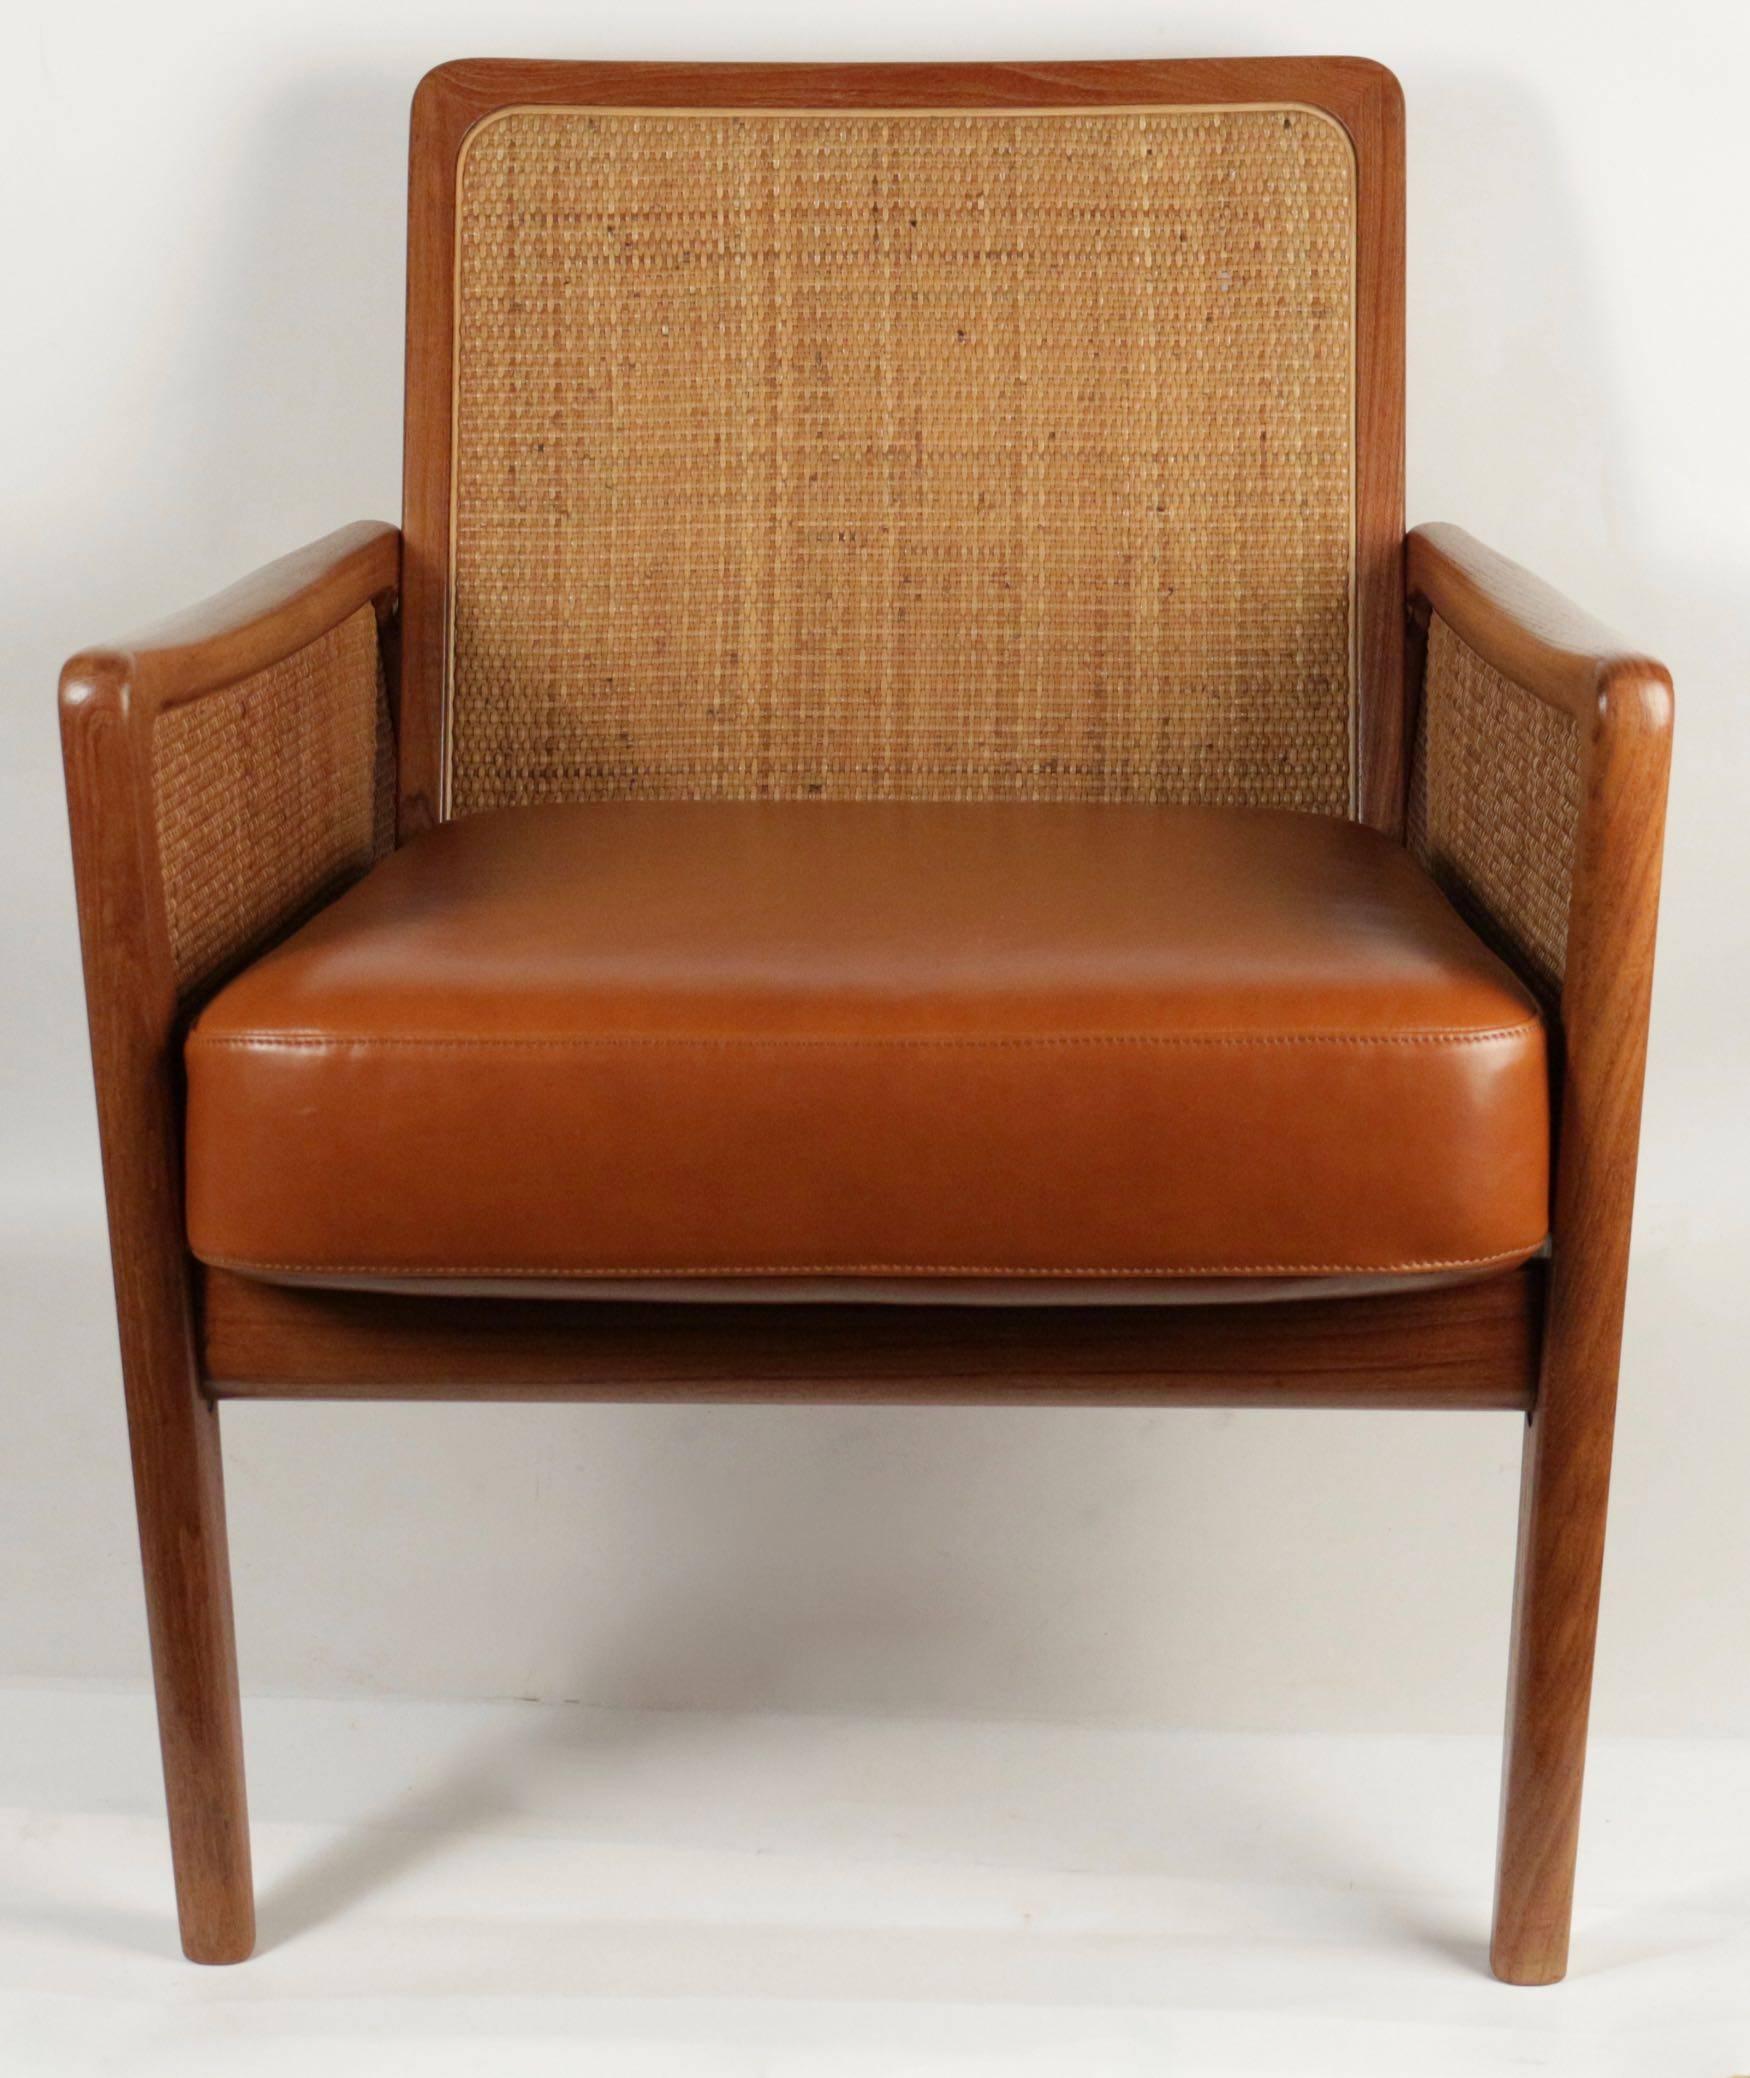 Pair of armchairs by Peter Hvidt & Olga Molgaard, model FD151, 1956.
Teak and original canning. Manufacturer France & Daverkosen.
Upholstery have been remade in Caramel full grain leather.

Rare and beautiful armchairs.